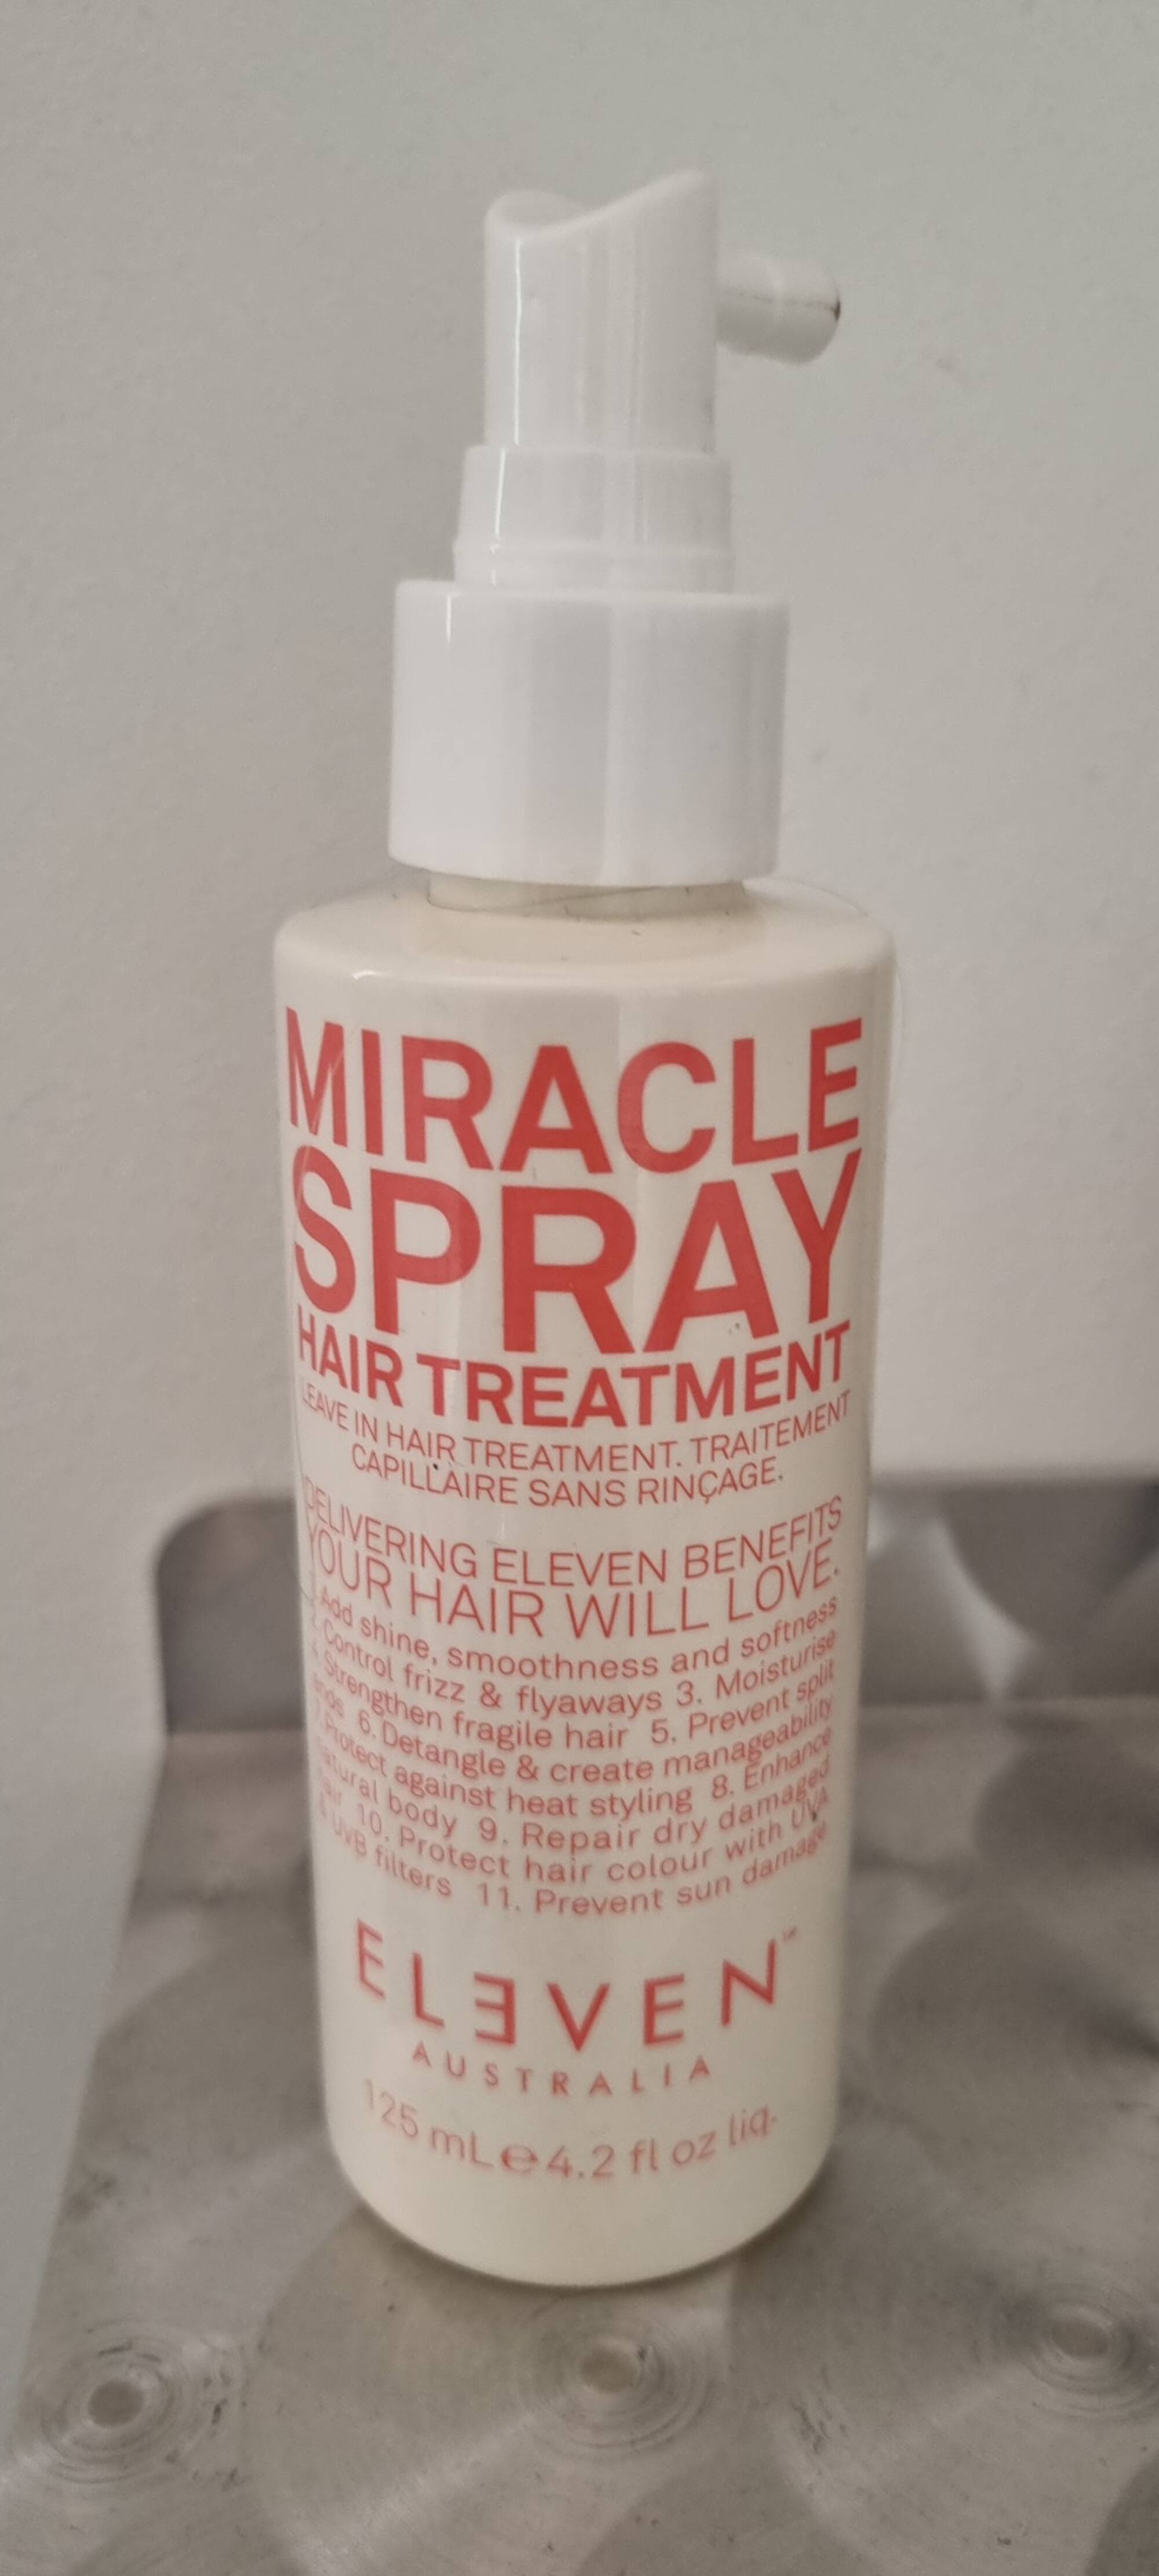 ELEVEN - Miracle spray - Hair treatment